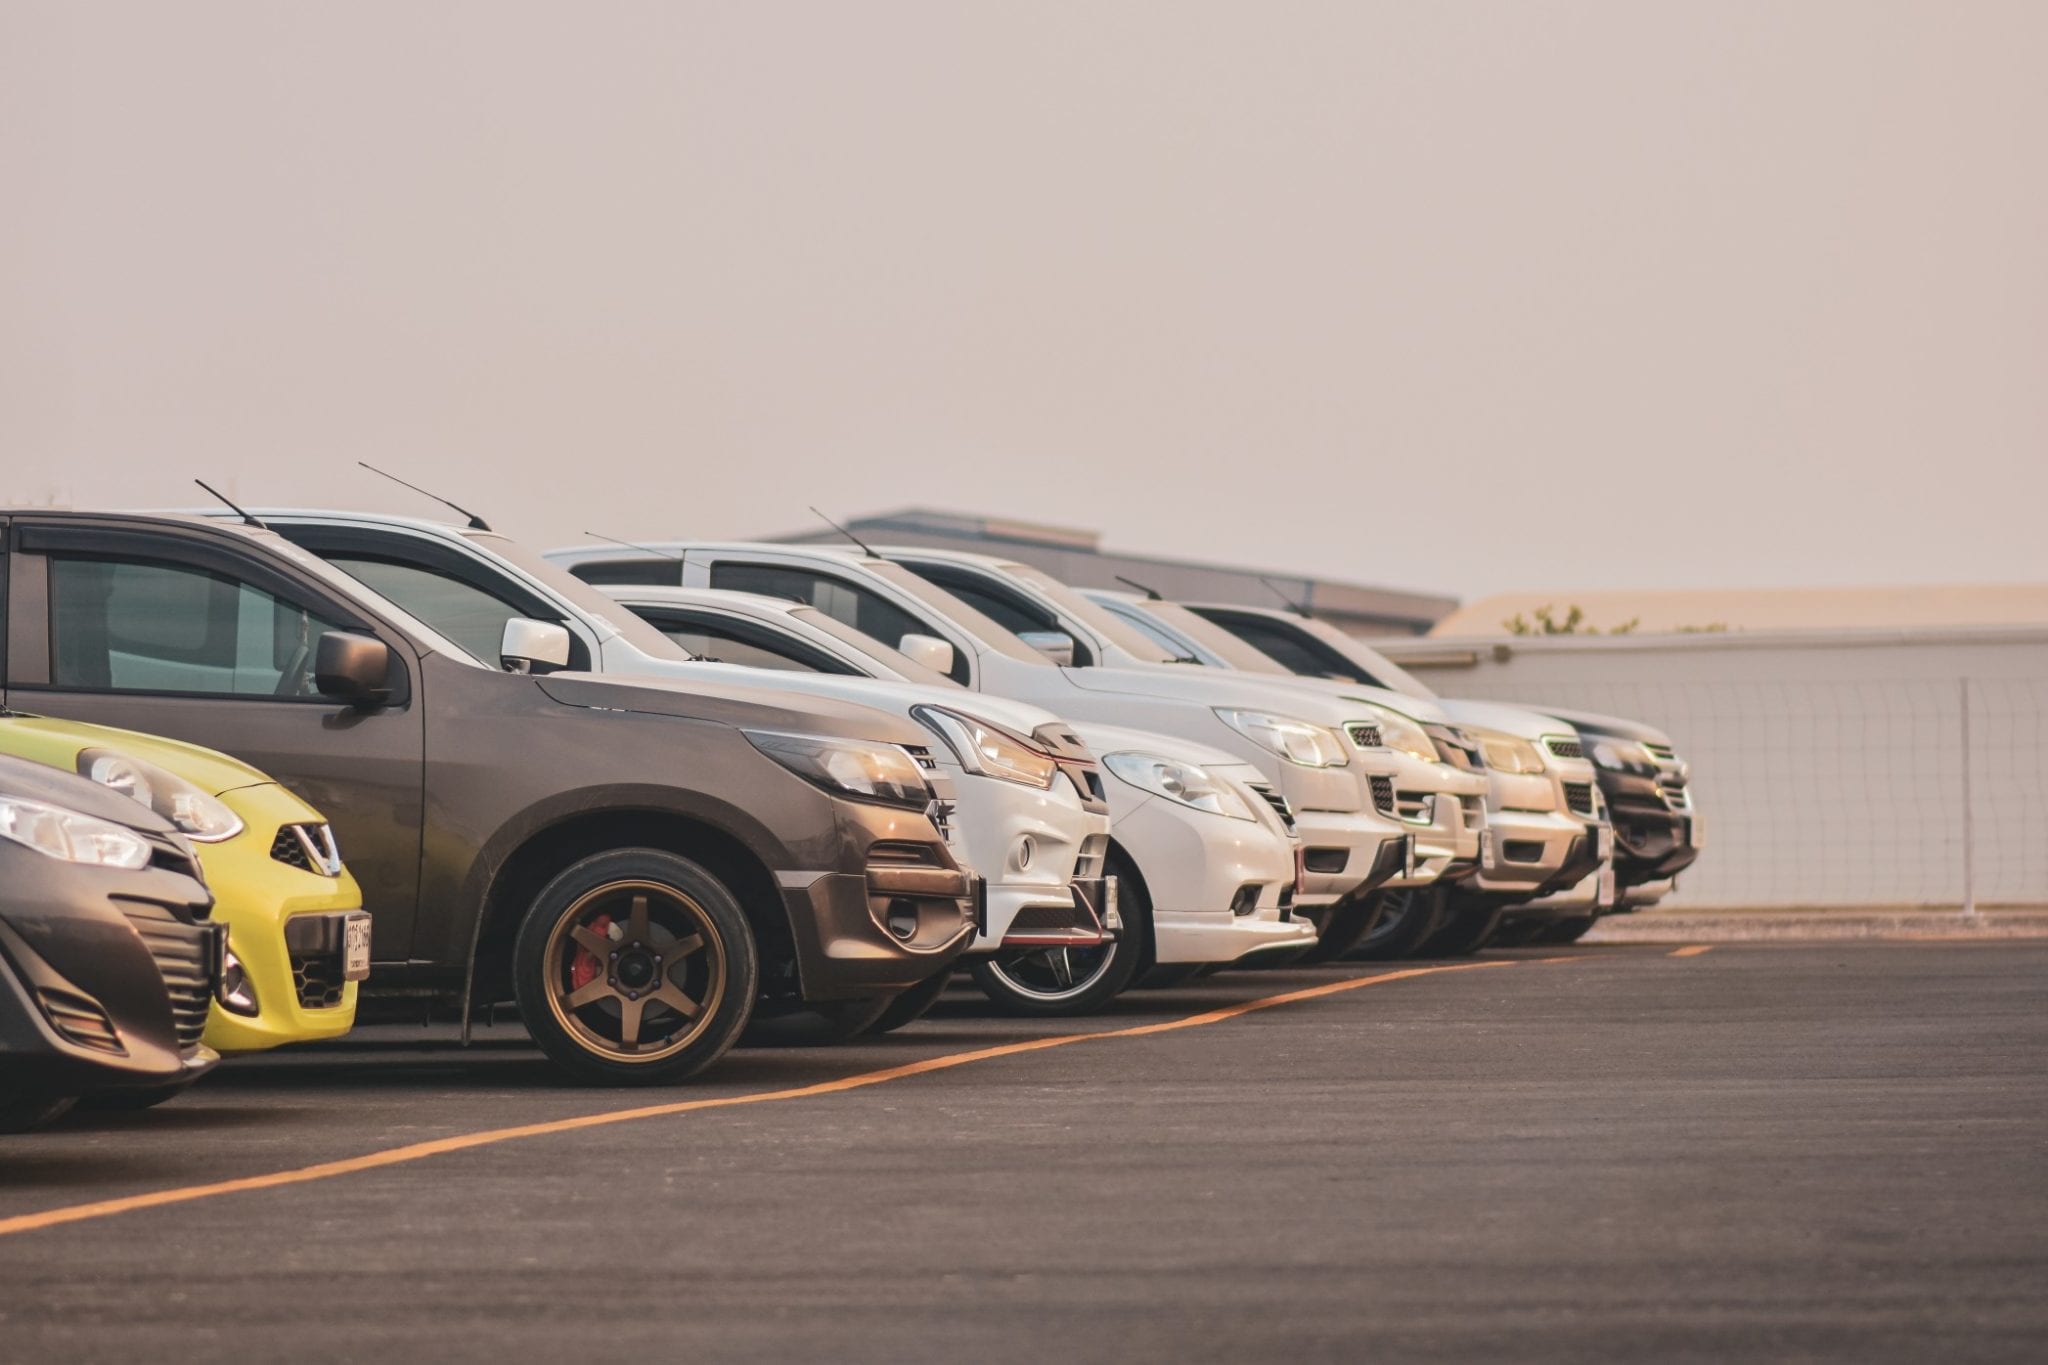 cars parked at a private auto auction